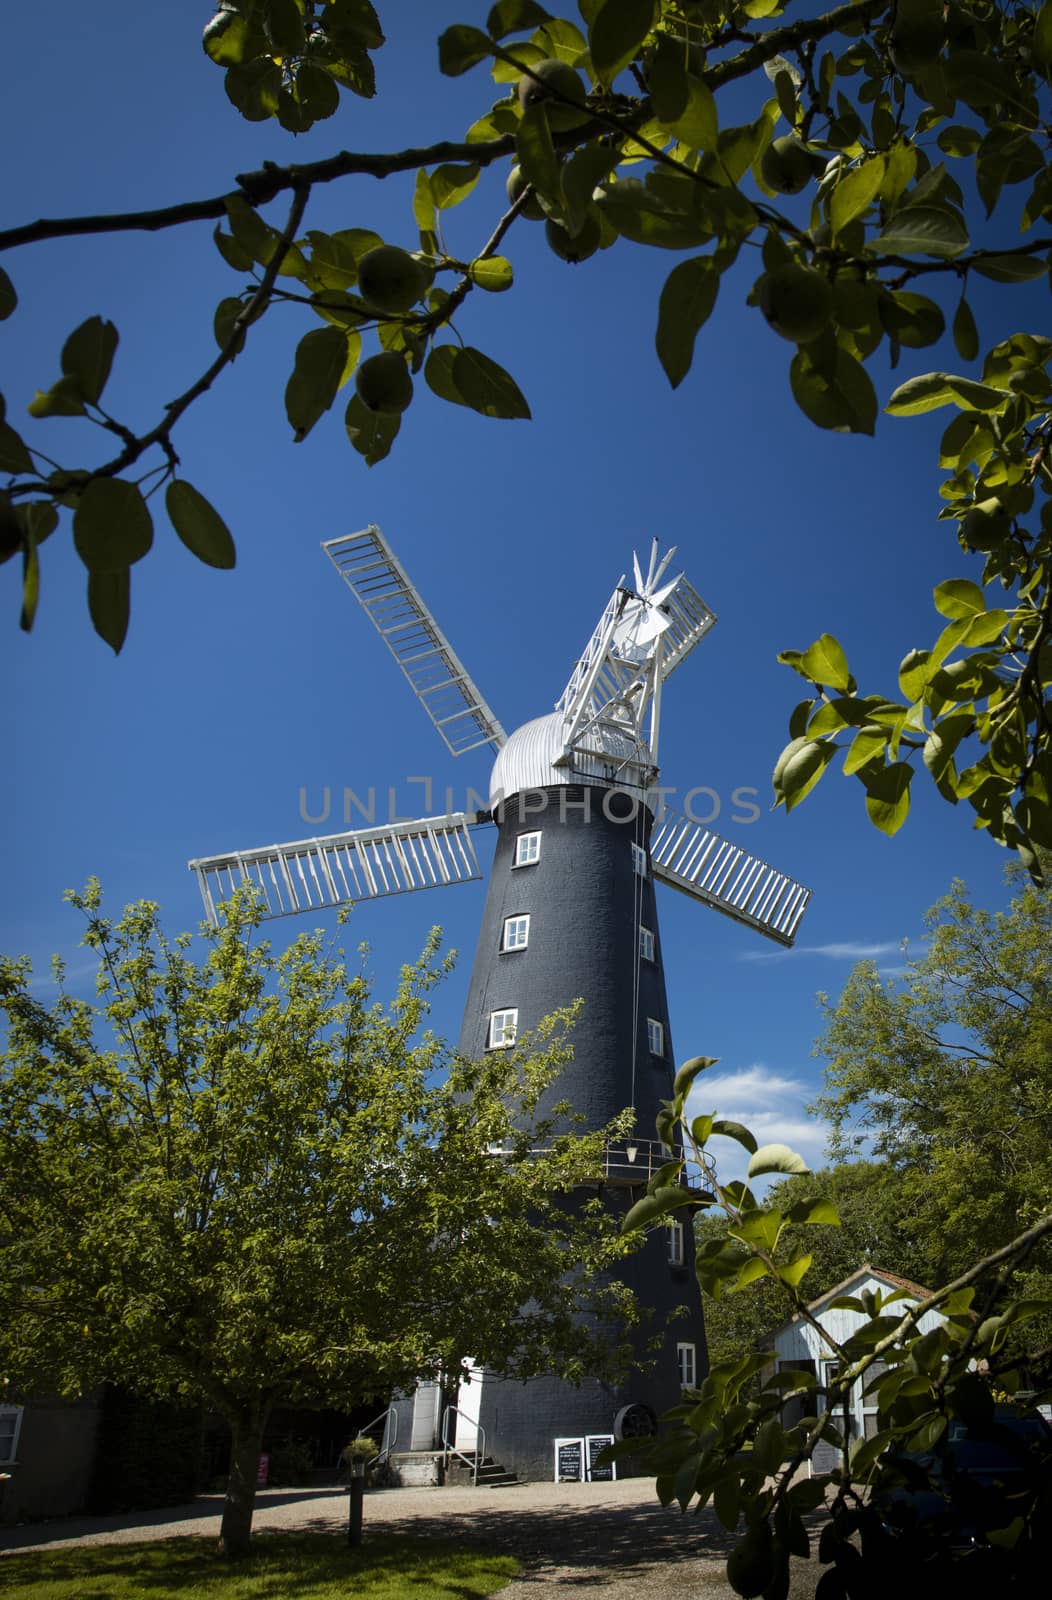 Alford, Lincolnshire, United Kingdom, July 2017, View of Alford Windmill